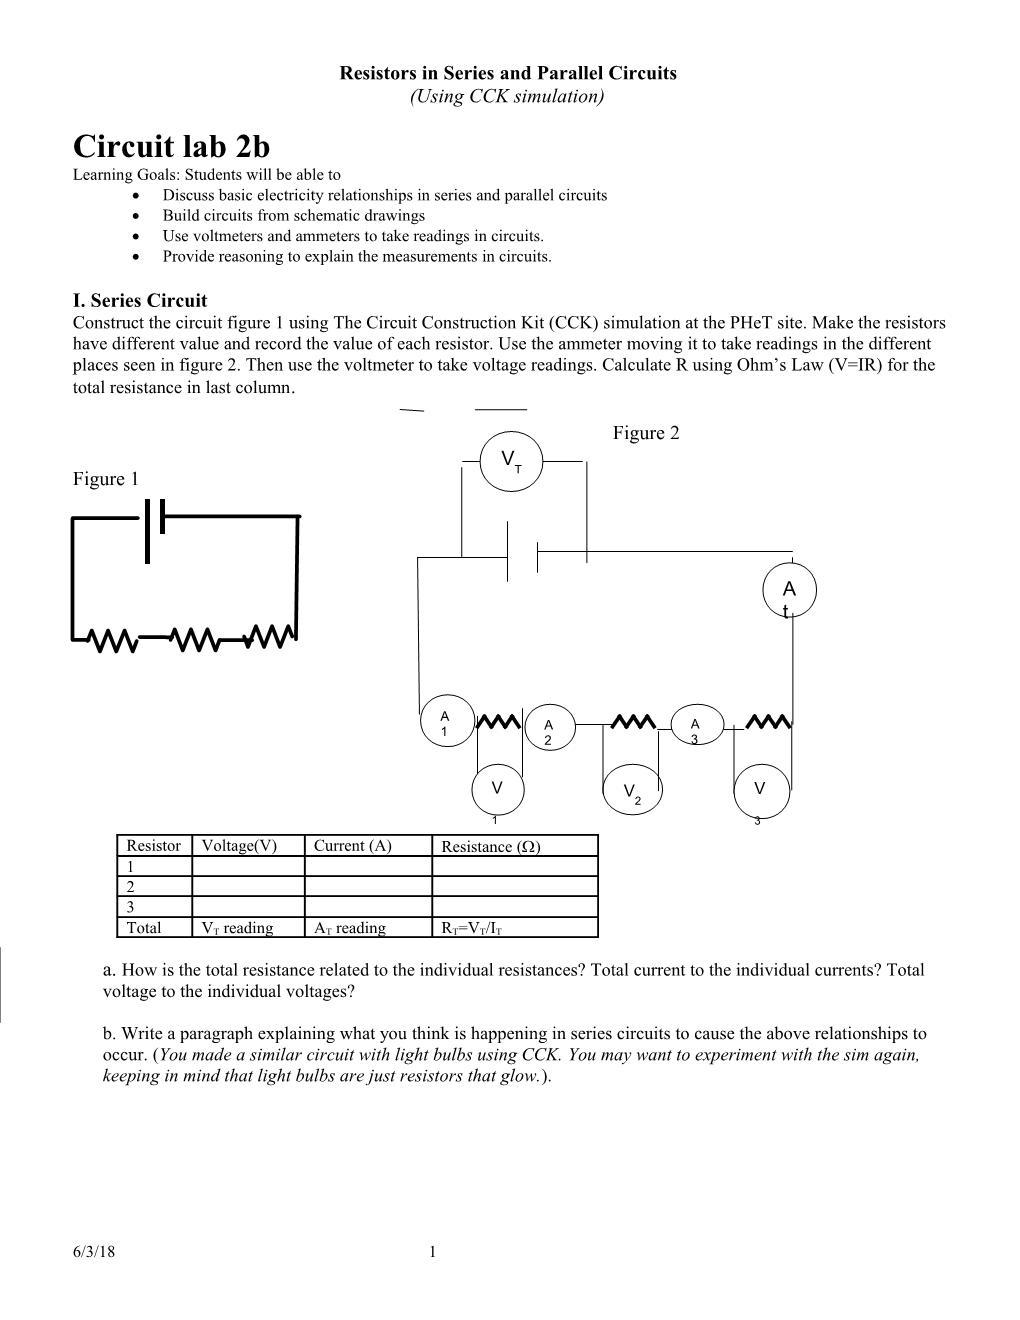 Resistors in Series and Parallel Circuits s1